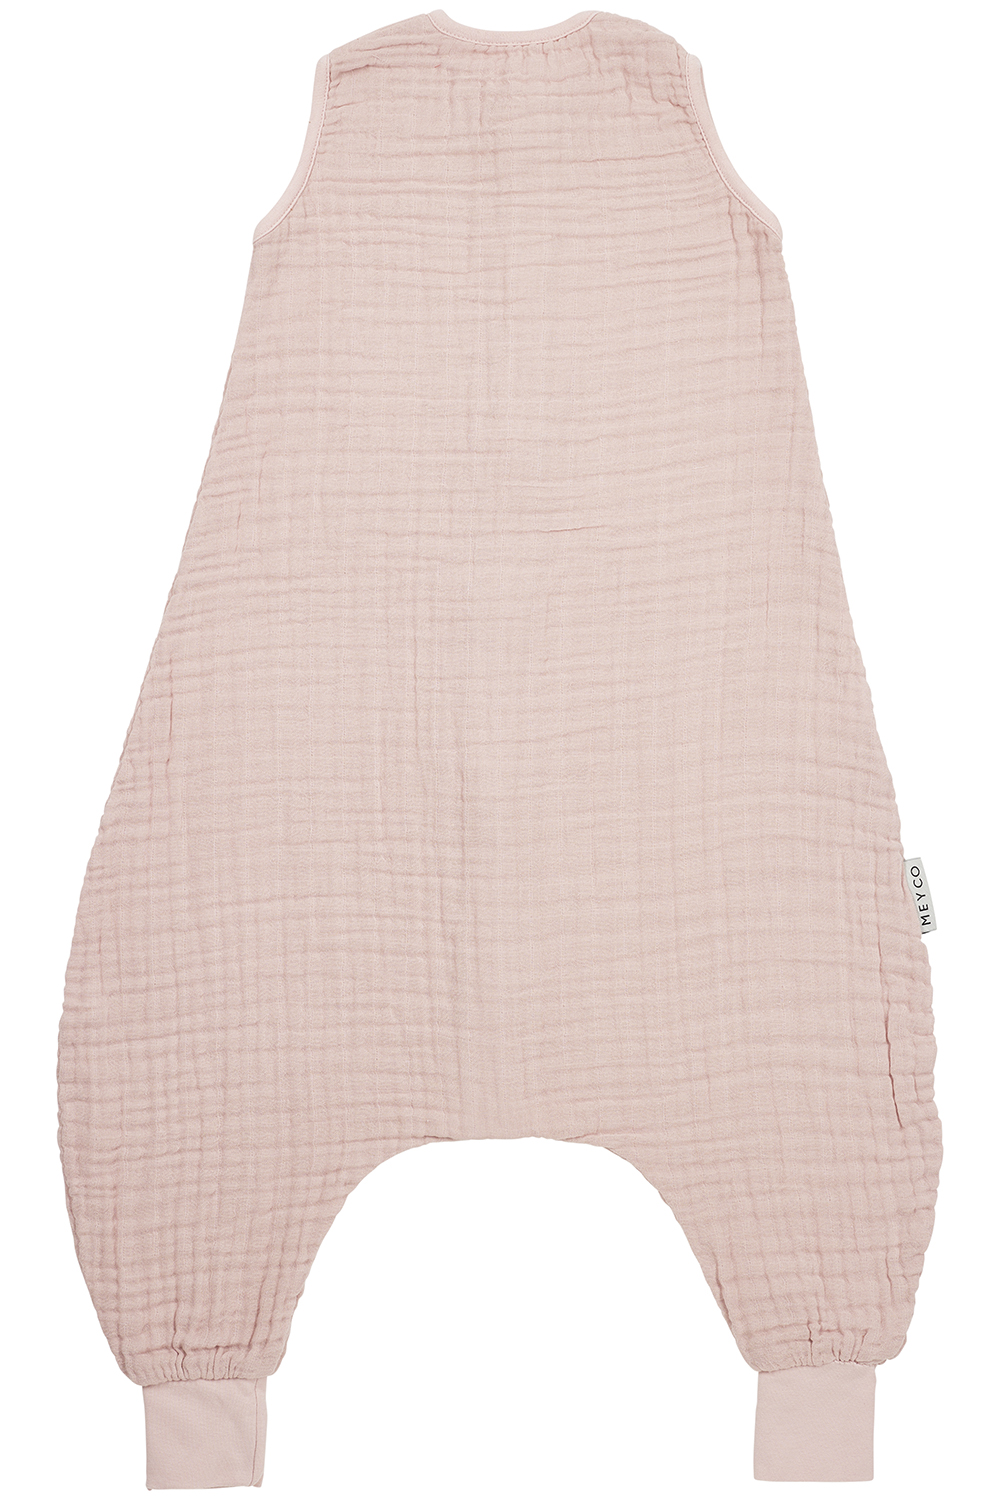 Baby summer sleep overall jumper pre-washed muslin Uni - soft pink - 104cm